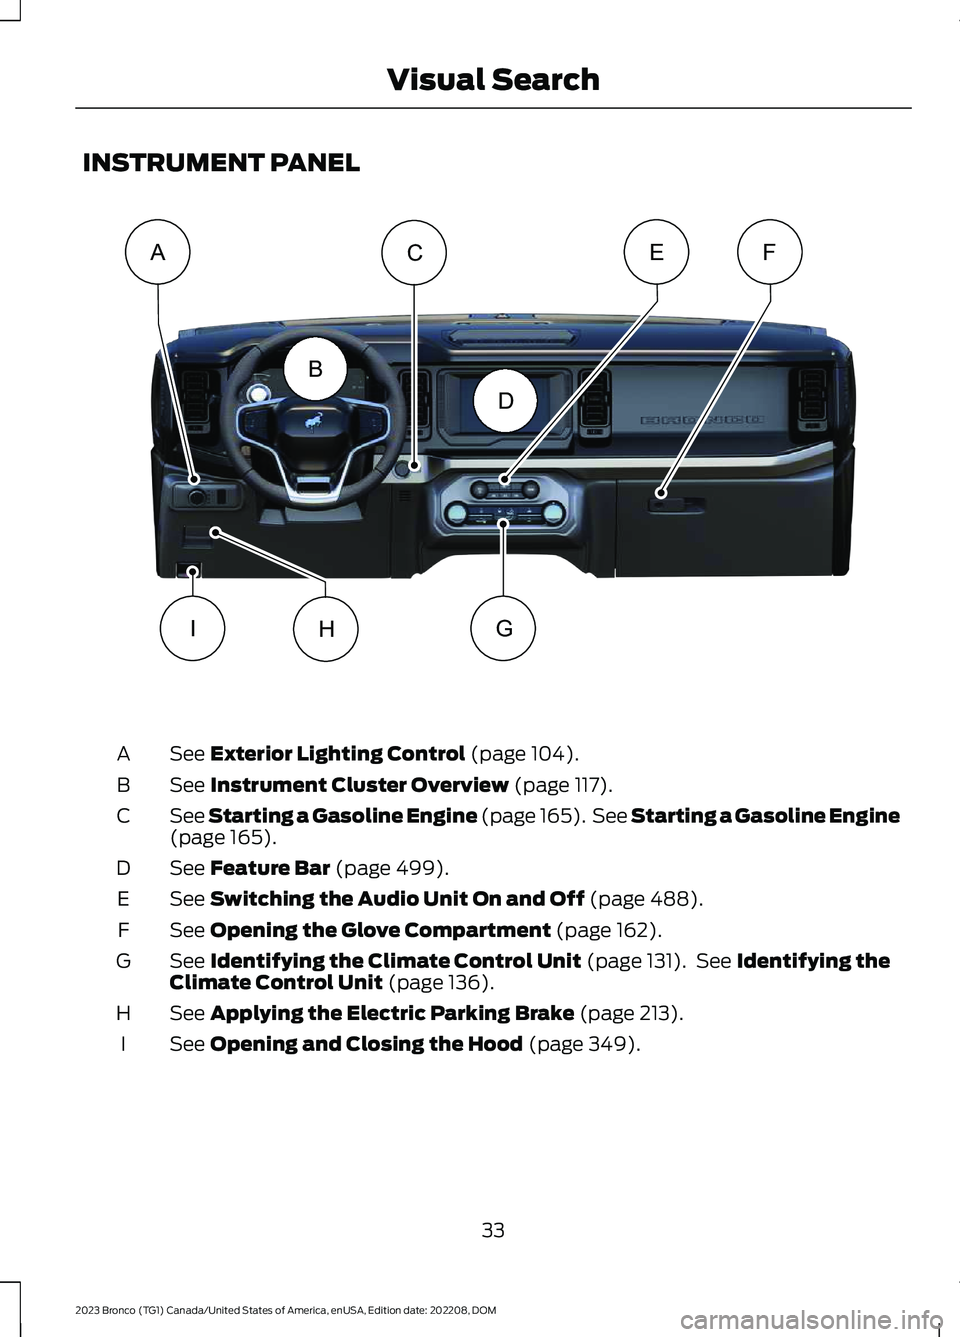 FORD BRONCO 2023  Owners Manual INSTRUMENT PANEL
See Exterior Lighting Control (page 104).A
See Instrument Cluster Overview (page 117).B
See Starting a Gasoline Engine (page 165). See Starting a Gasoline Engine(page 165).C
See Featu